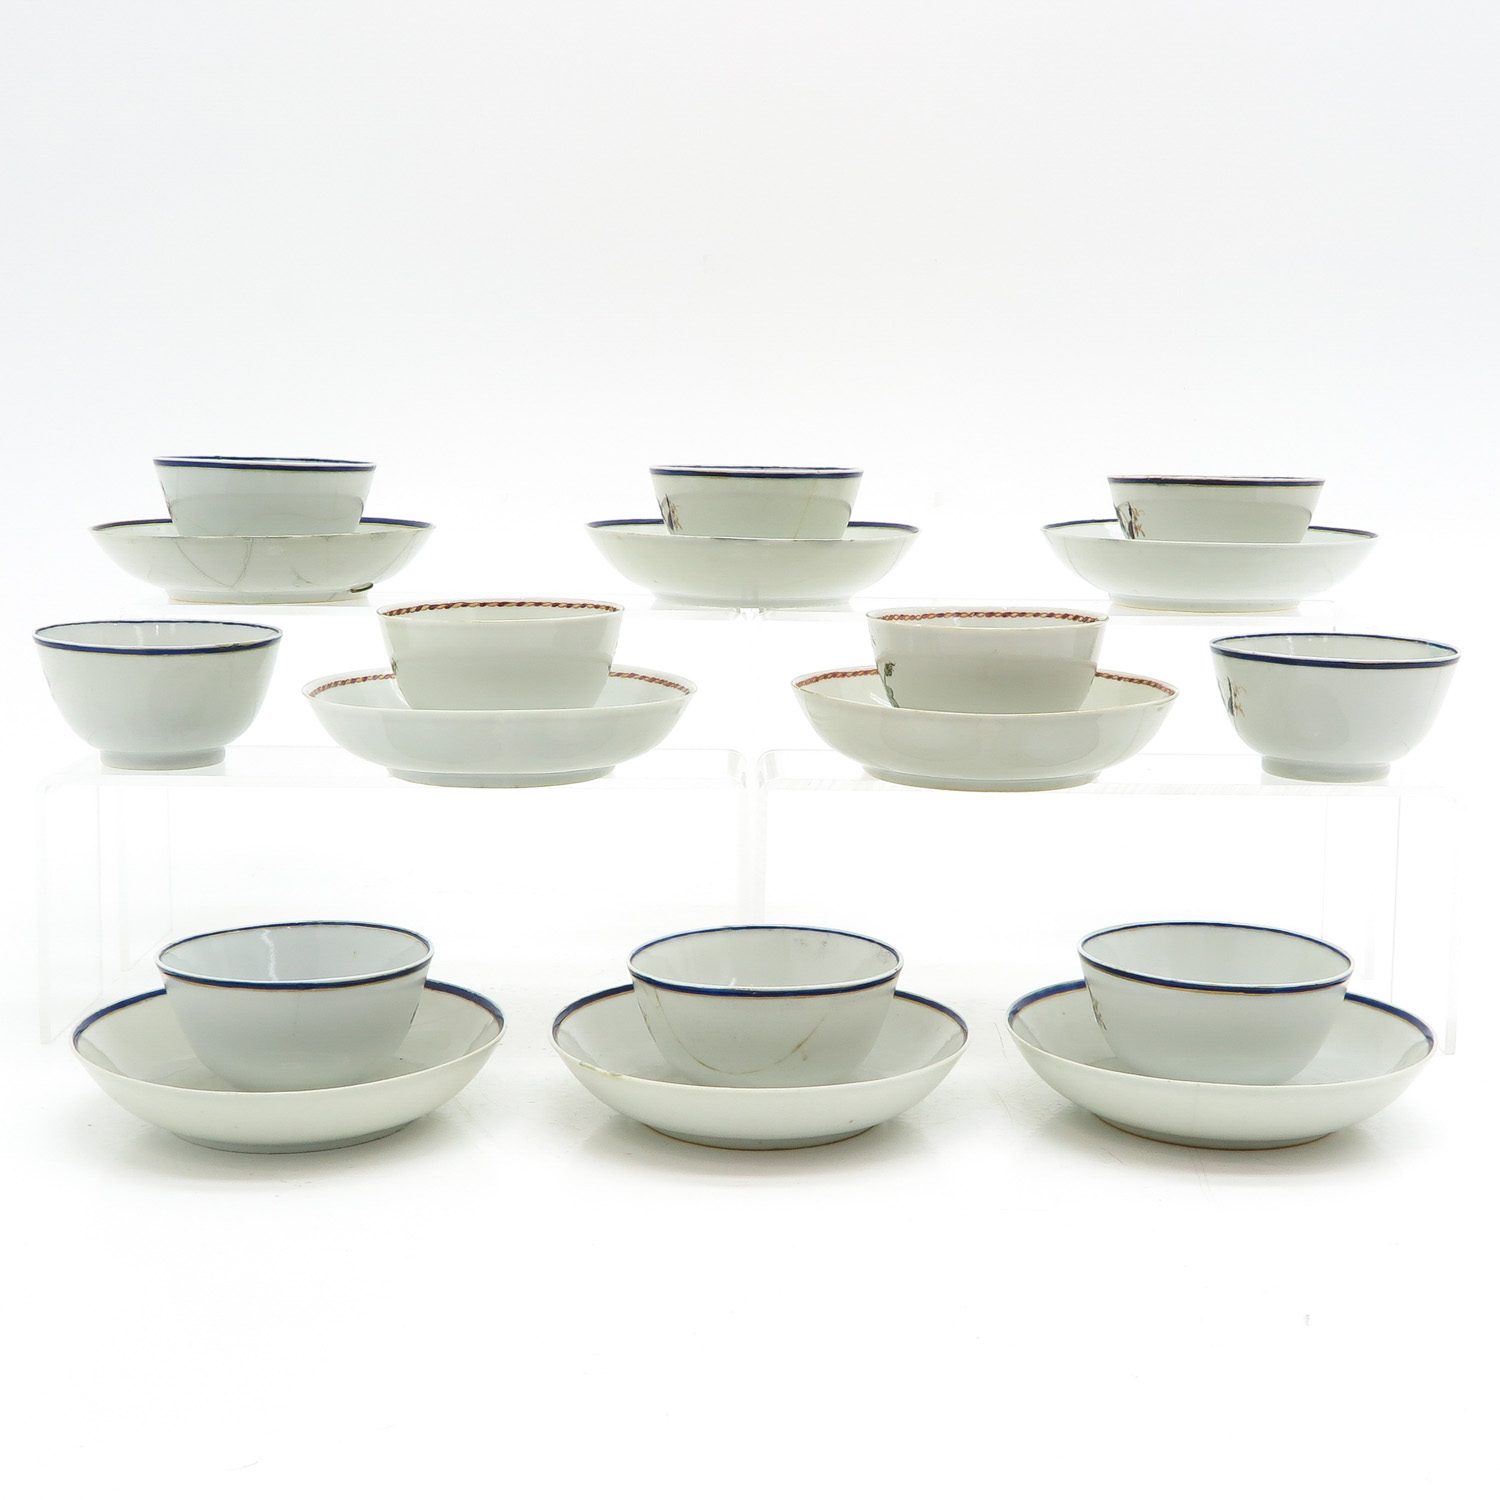 A Collection of Cups and Saucers - Image 2 of 8